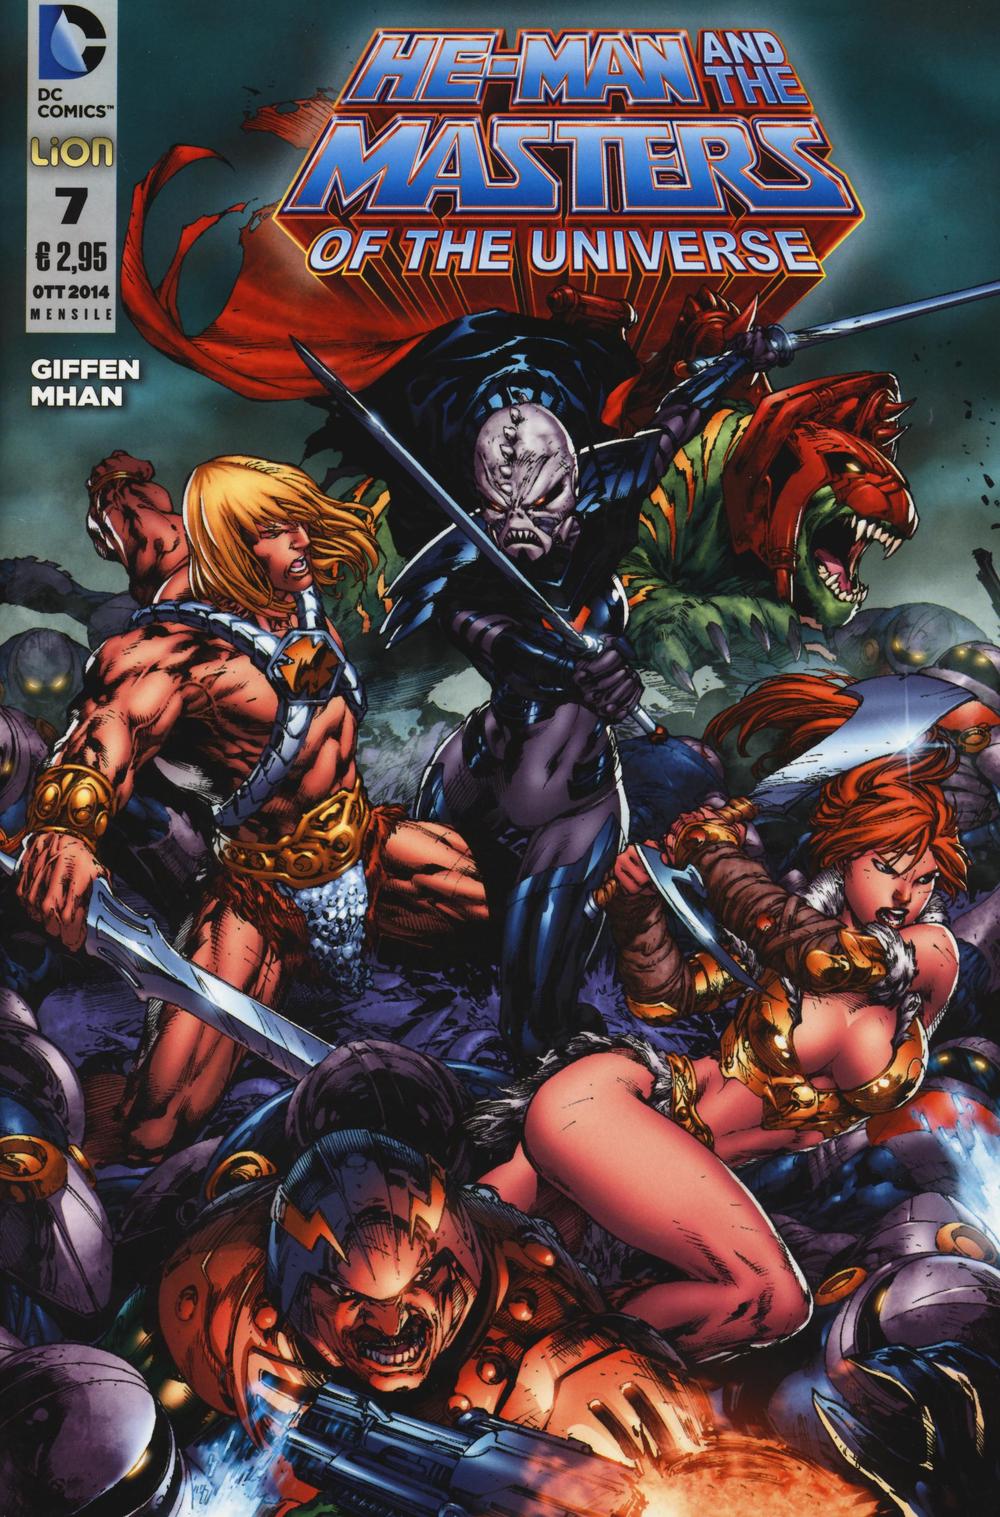 He-Man and the masters of the universe. Vol. 7